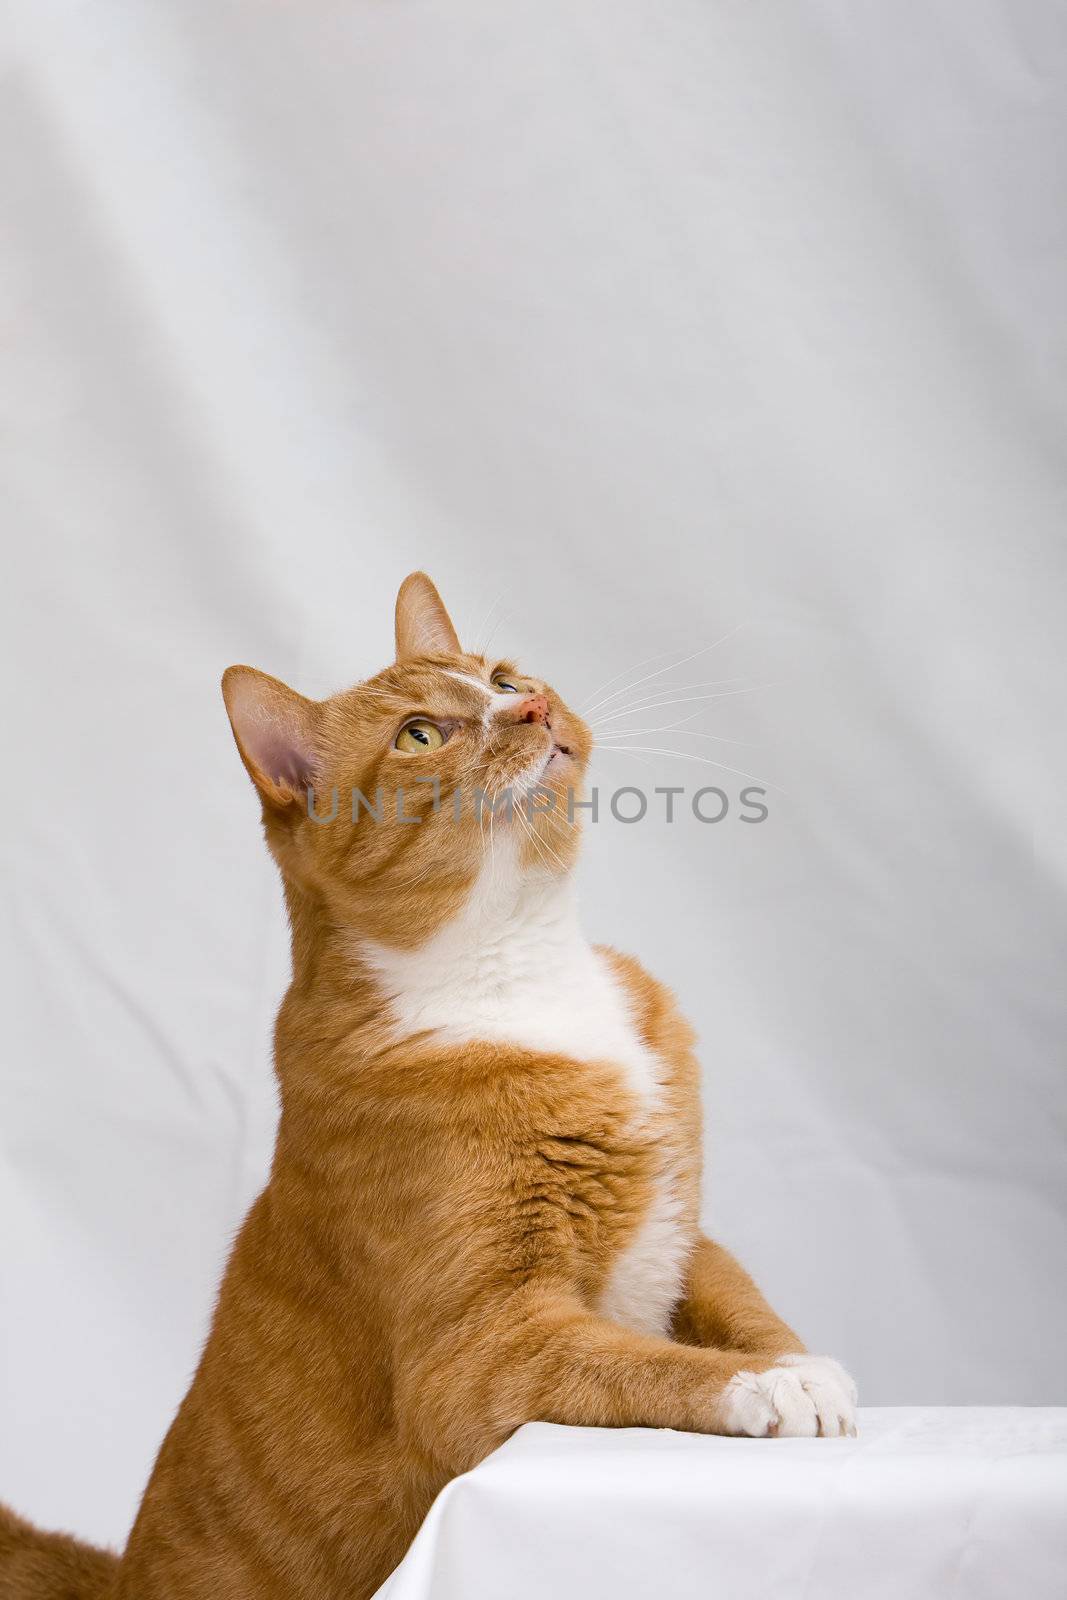 An orange cat looking up, isolated on white